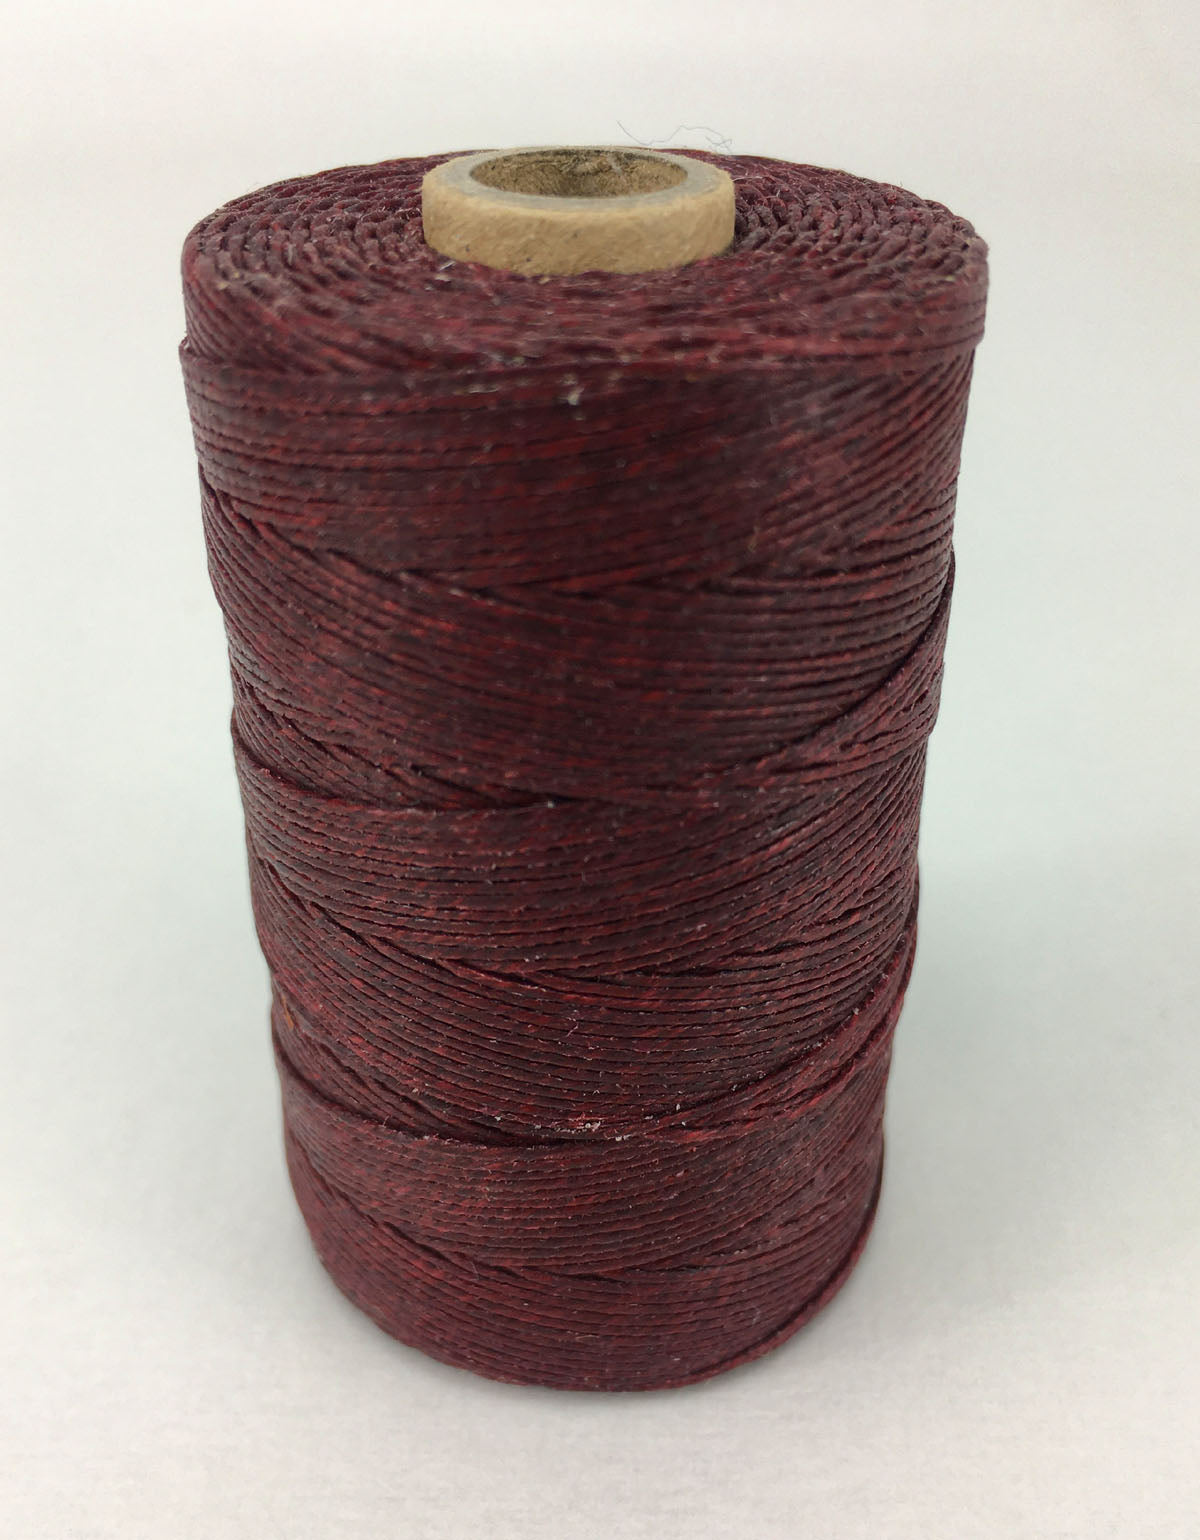 Maroon- Per spool 50g- 100% Pure Linen Thread- Waxed- 18/3 No.18 Cord 3- Approx 0.55mm thick